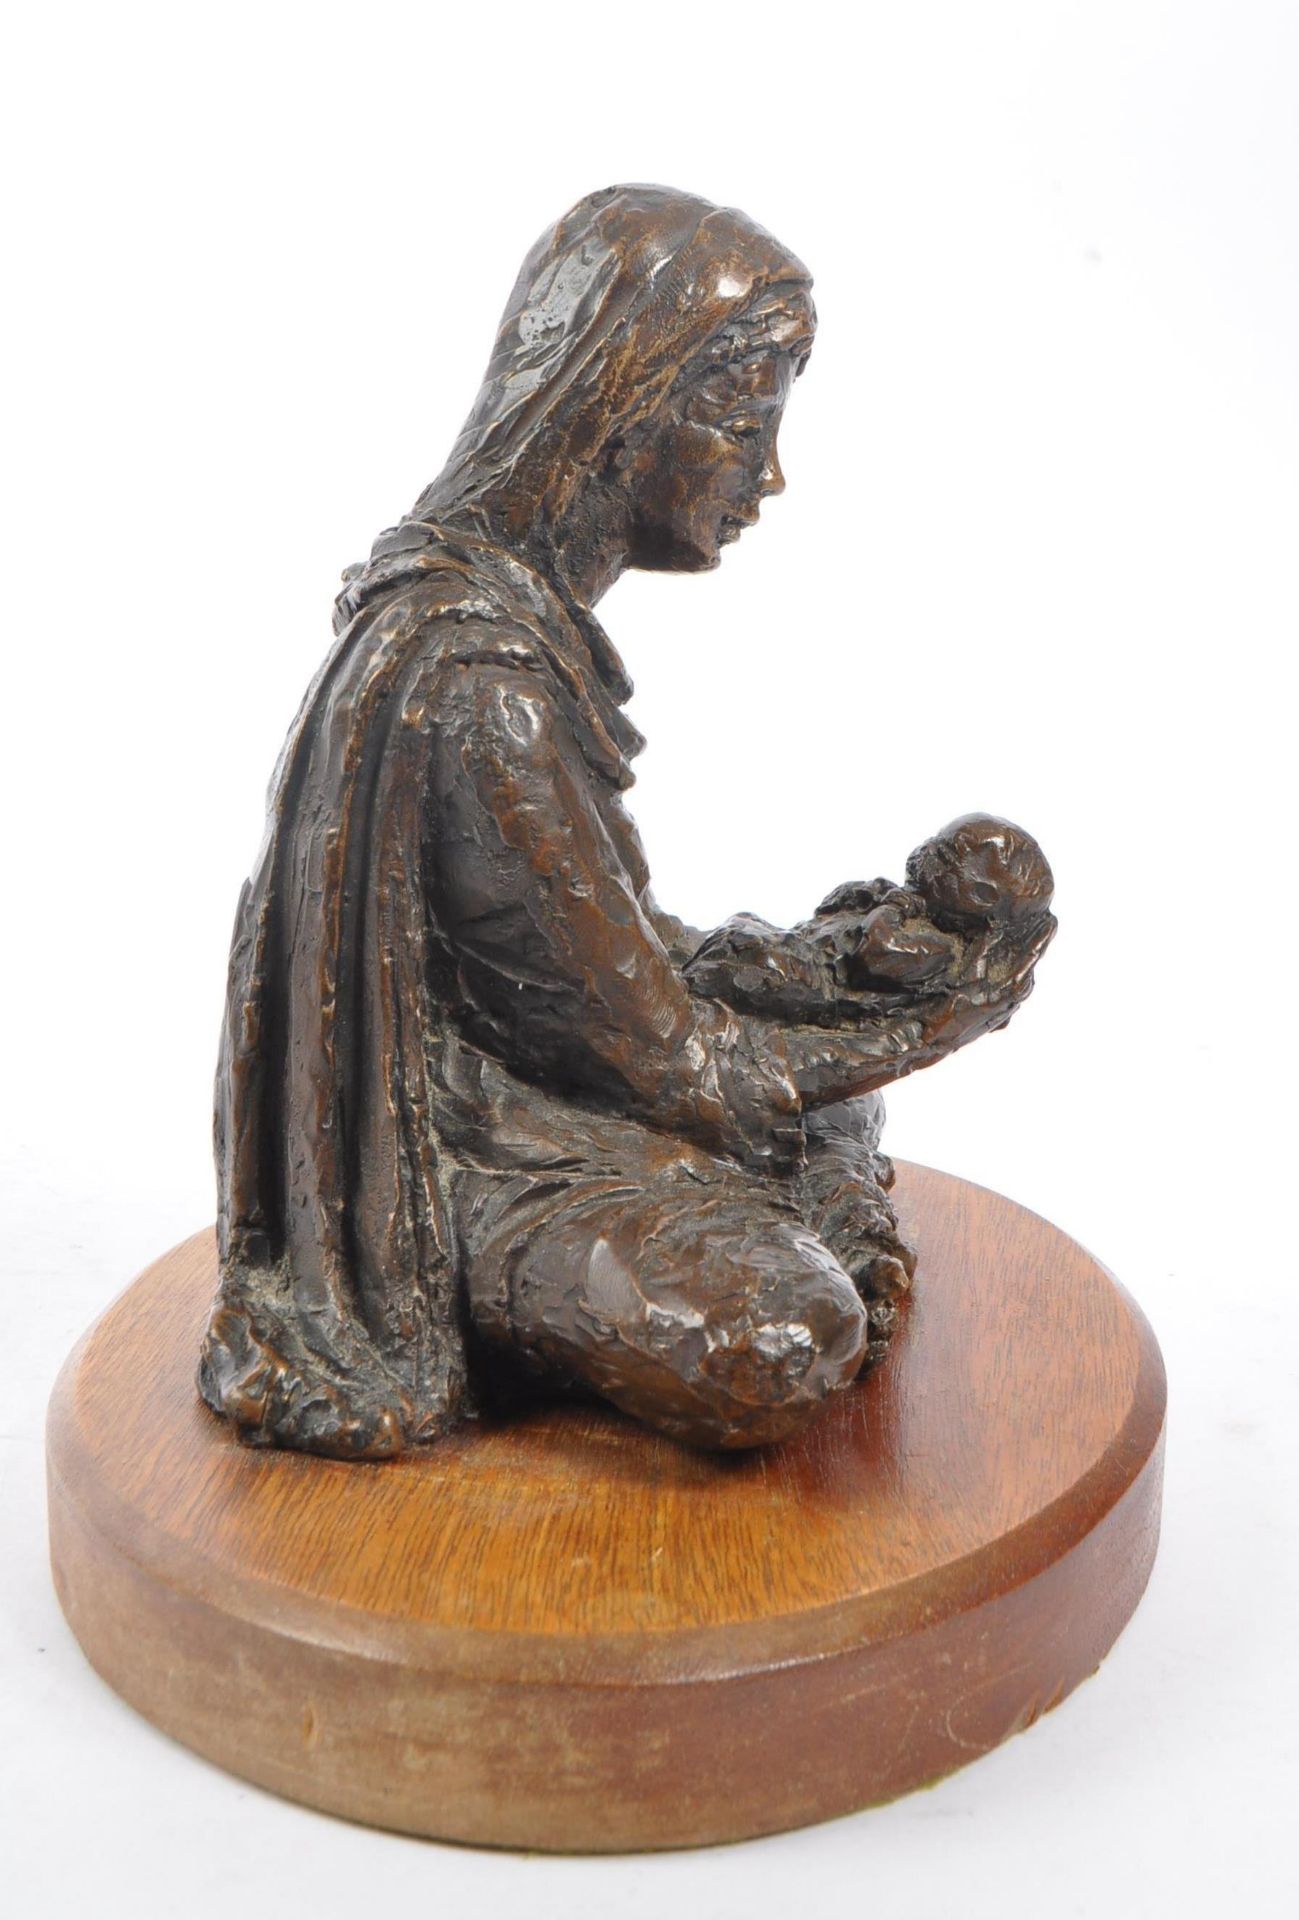 VINTAGE 20TH CENTURY SPELTER FIGURE OF WOMAN HOLDING BABY - Image 4 of 6